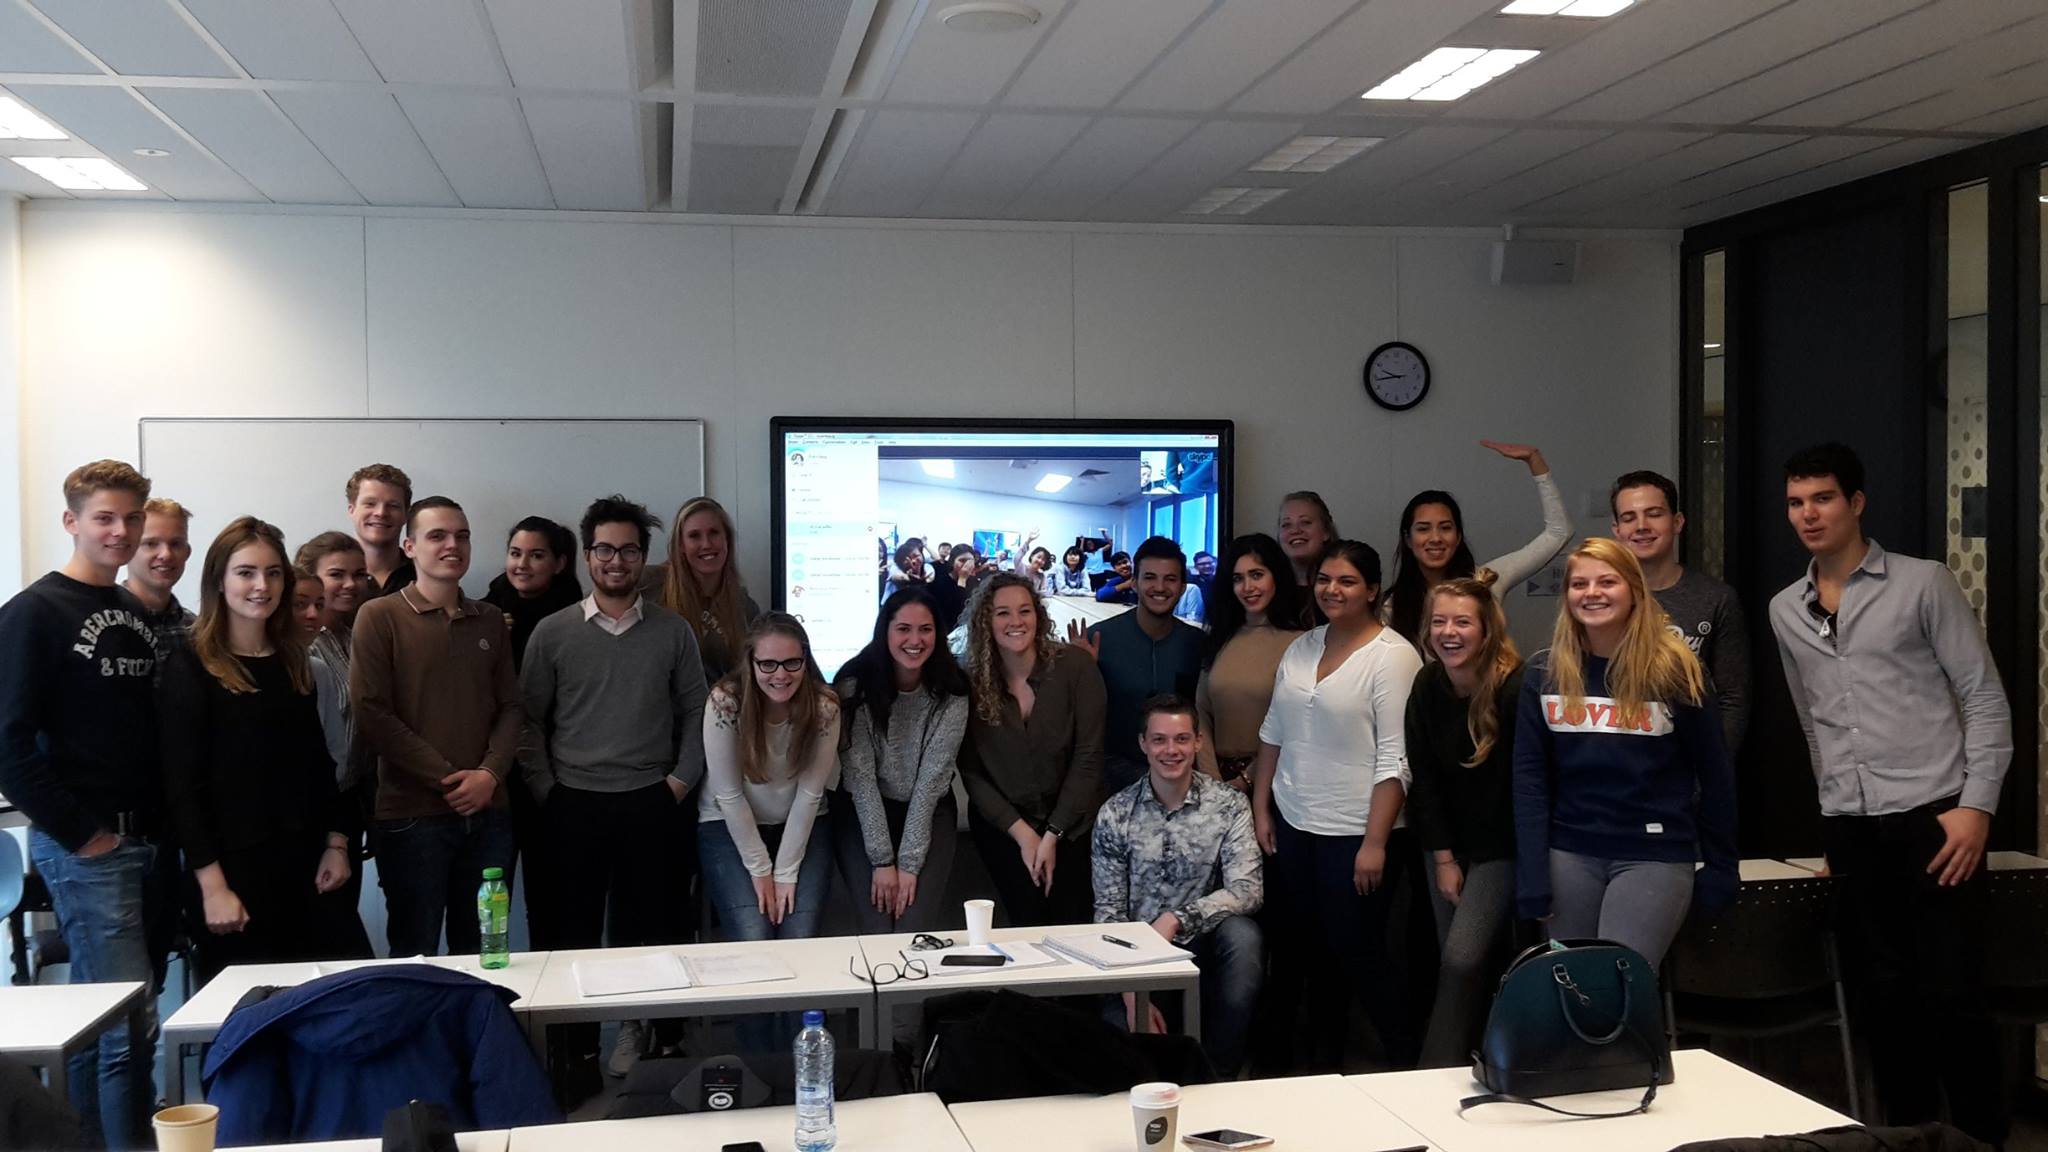 Students in the COIL course learned about each other in a two-week "Selfie Challenge". Pictured is the Dutch class in a group selfie.